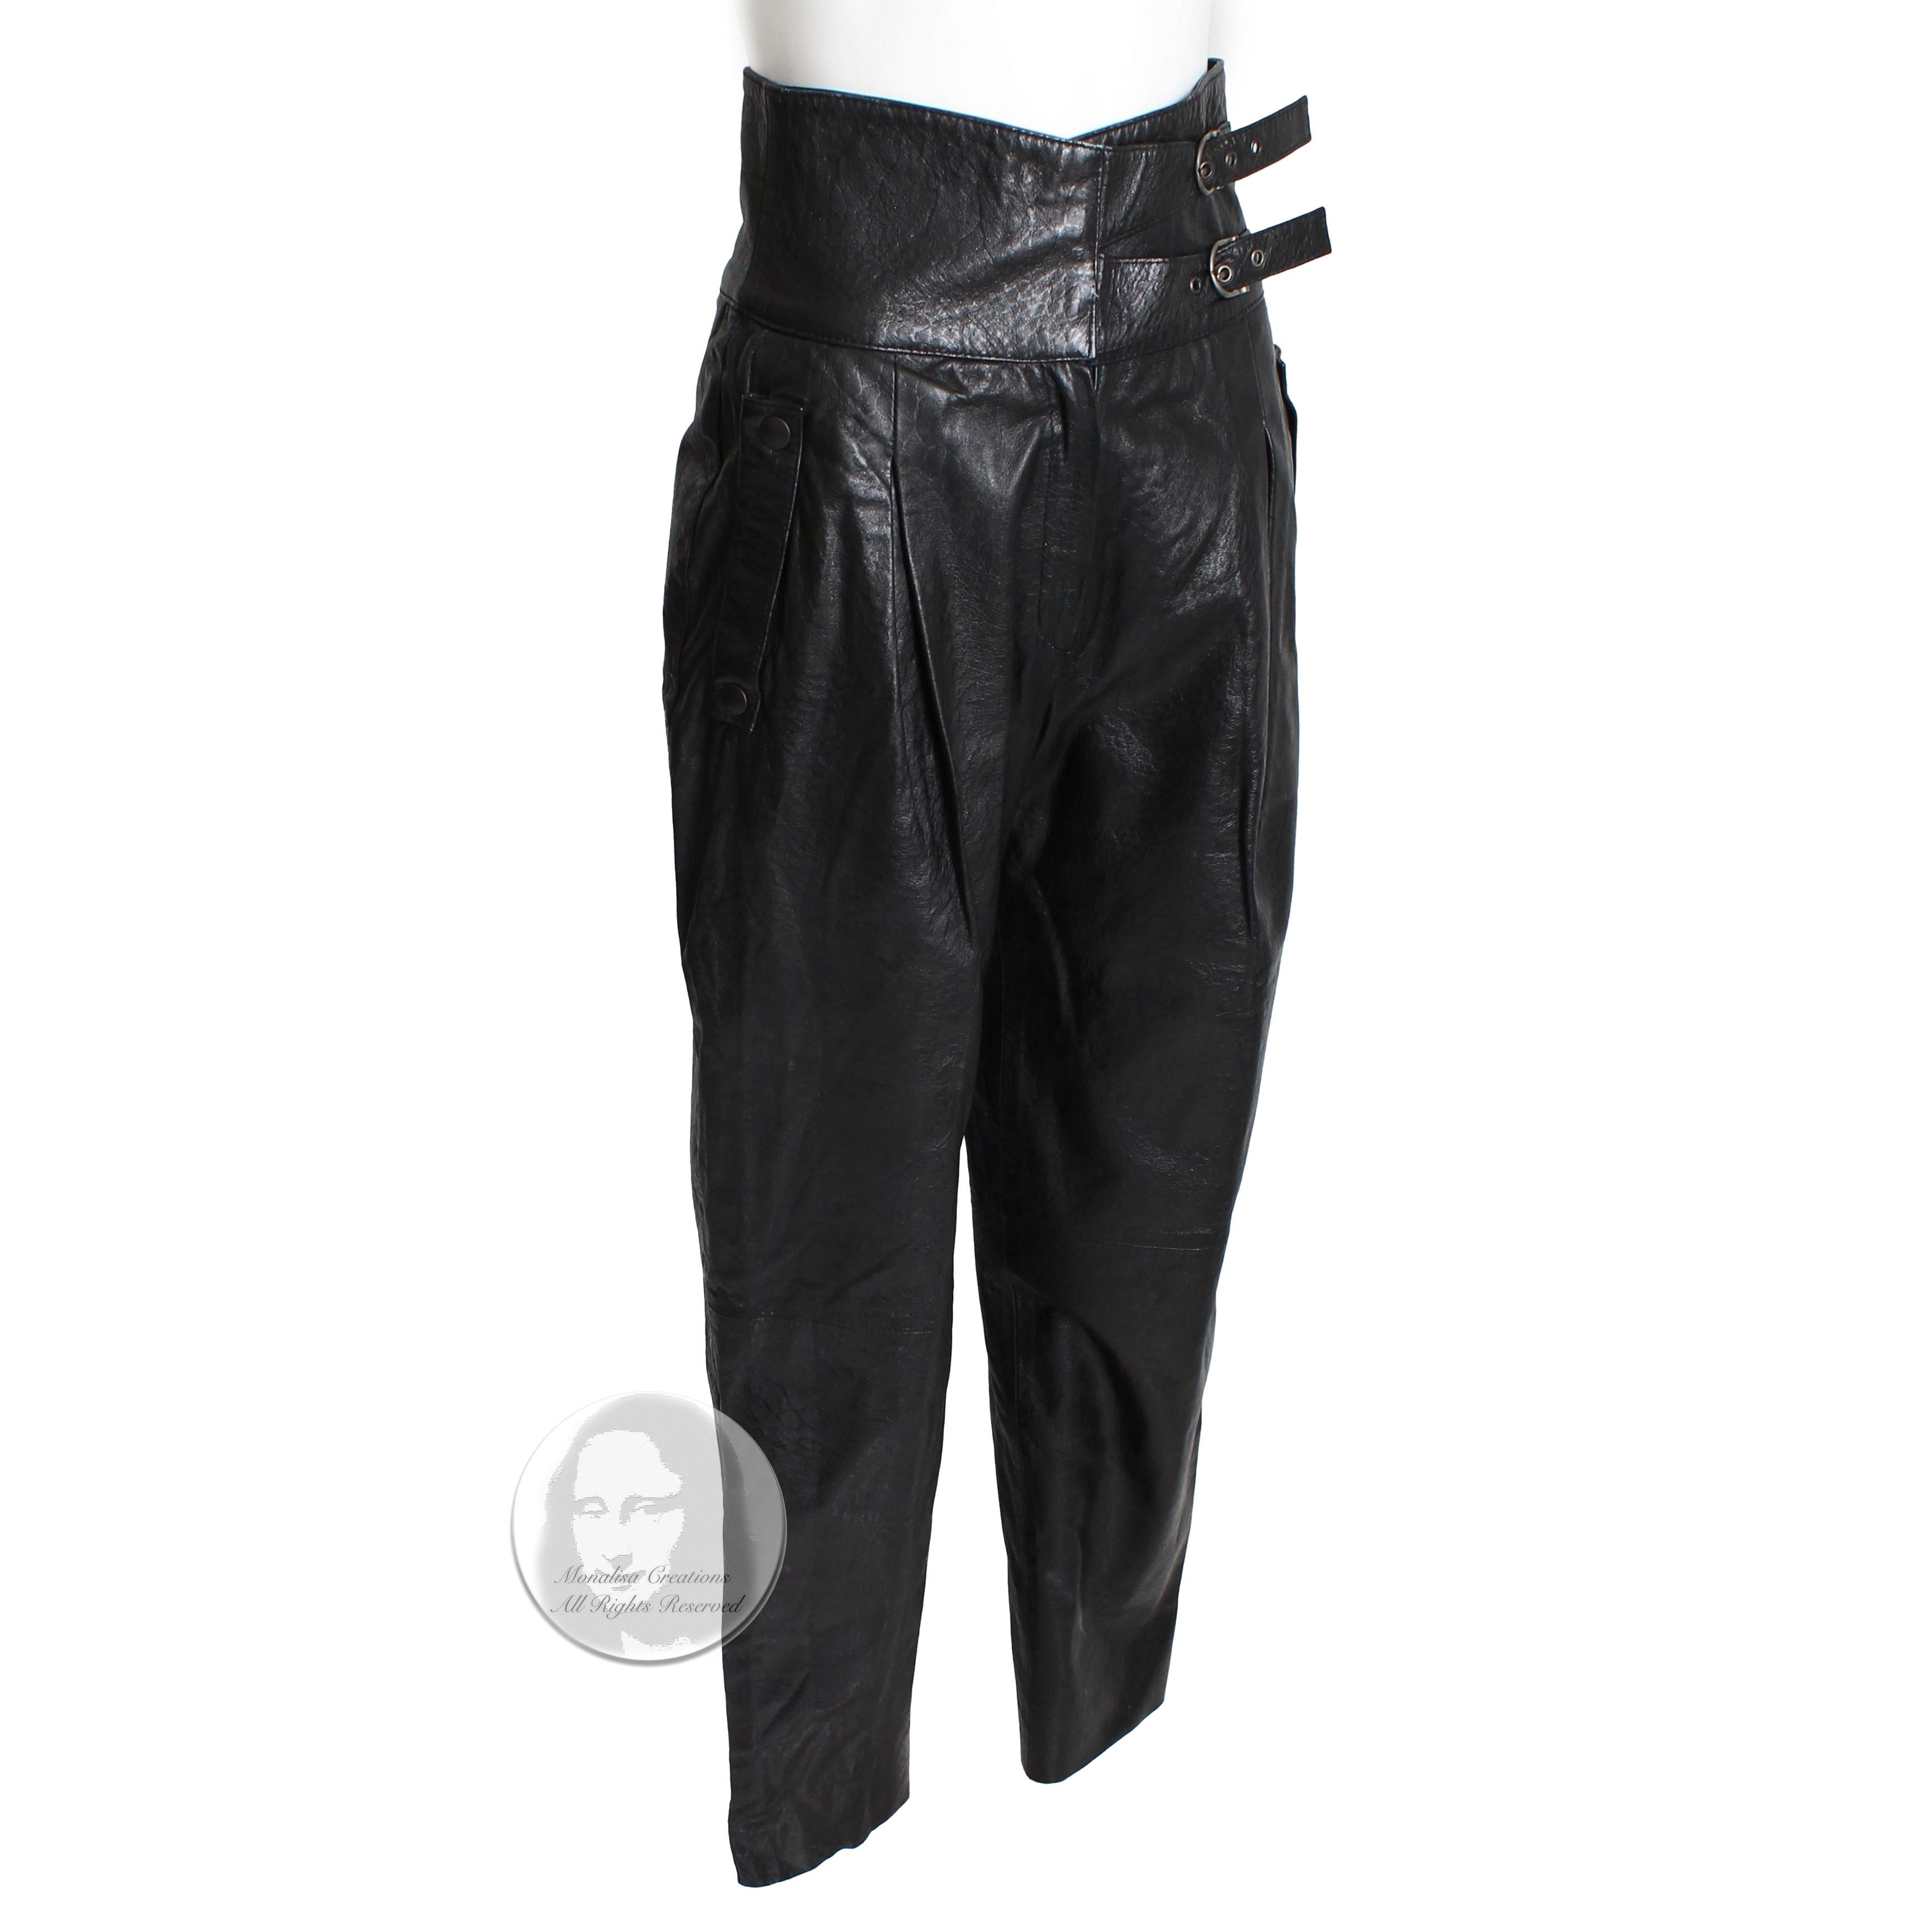 Vintage Beged-Or black leather pants, made in Israel, most likely in the 1980s. Made from stamped black leather, these chic leather pants fasten with a zipper, hidden flat hook & eye fasteners and two buckles, and feature slick snap pockets at each